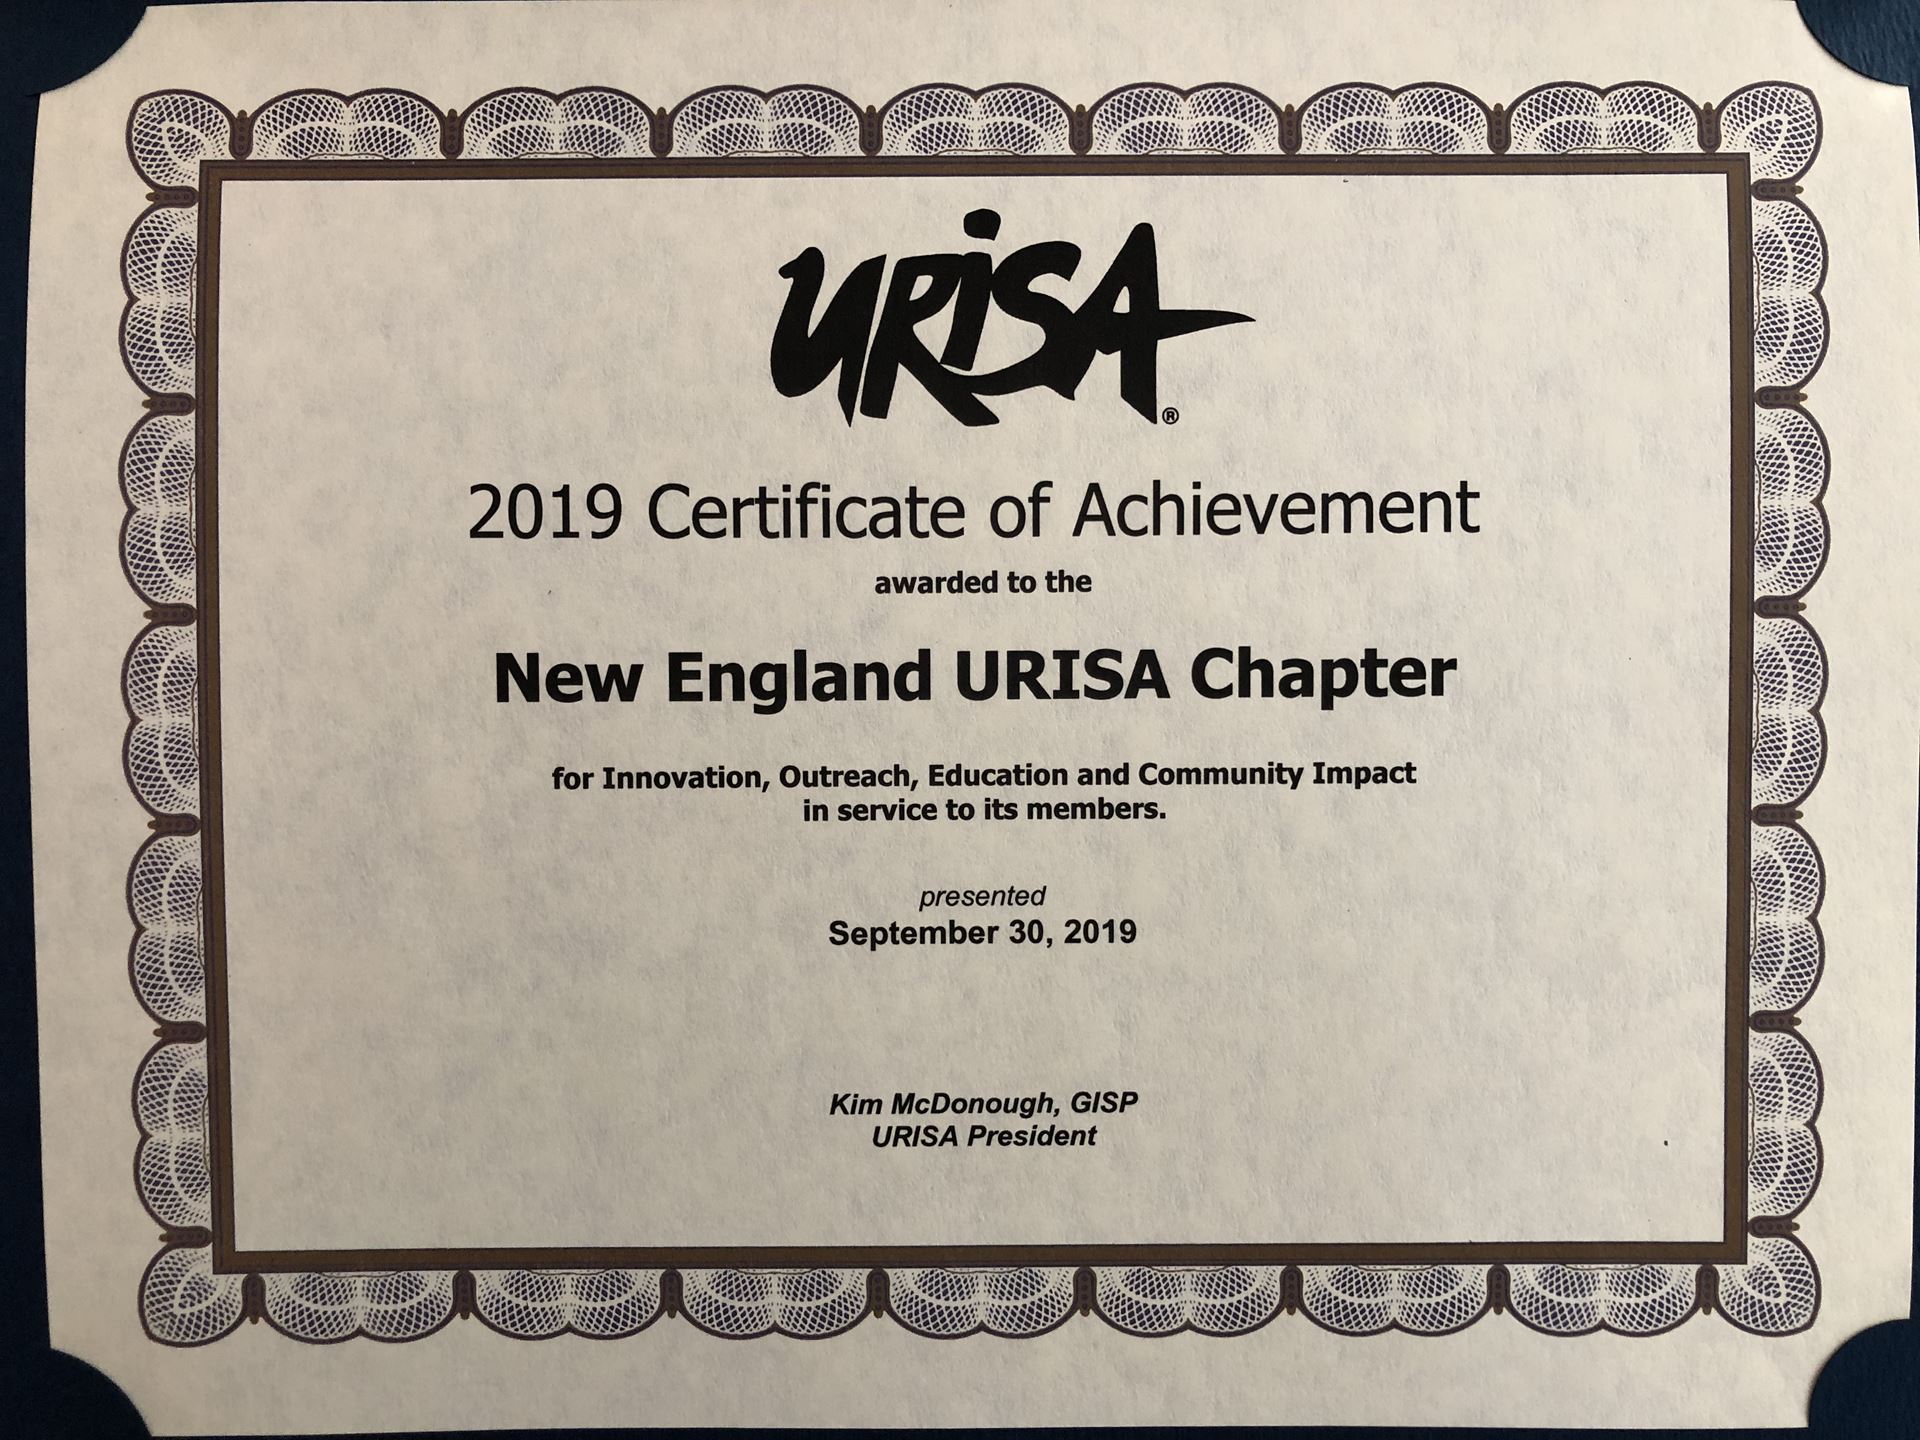 2019 Certificate of Achievement from URISA.